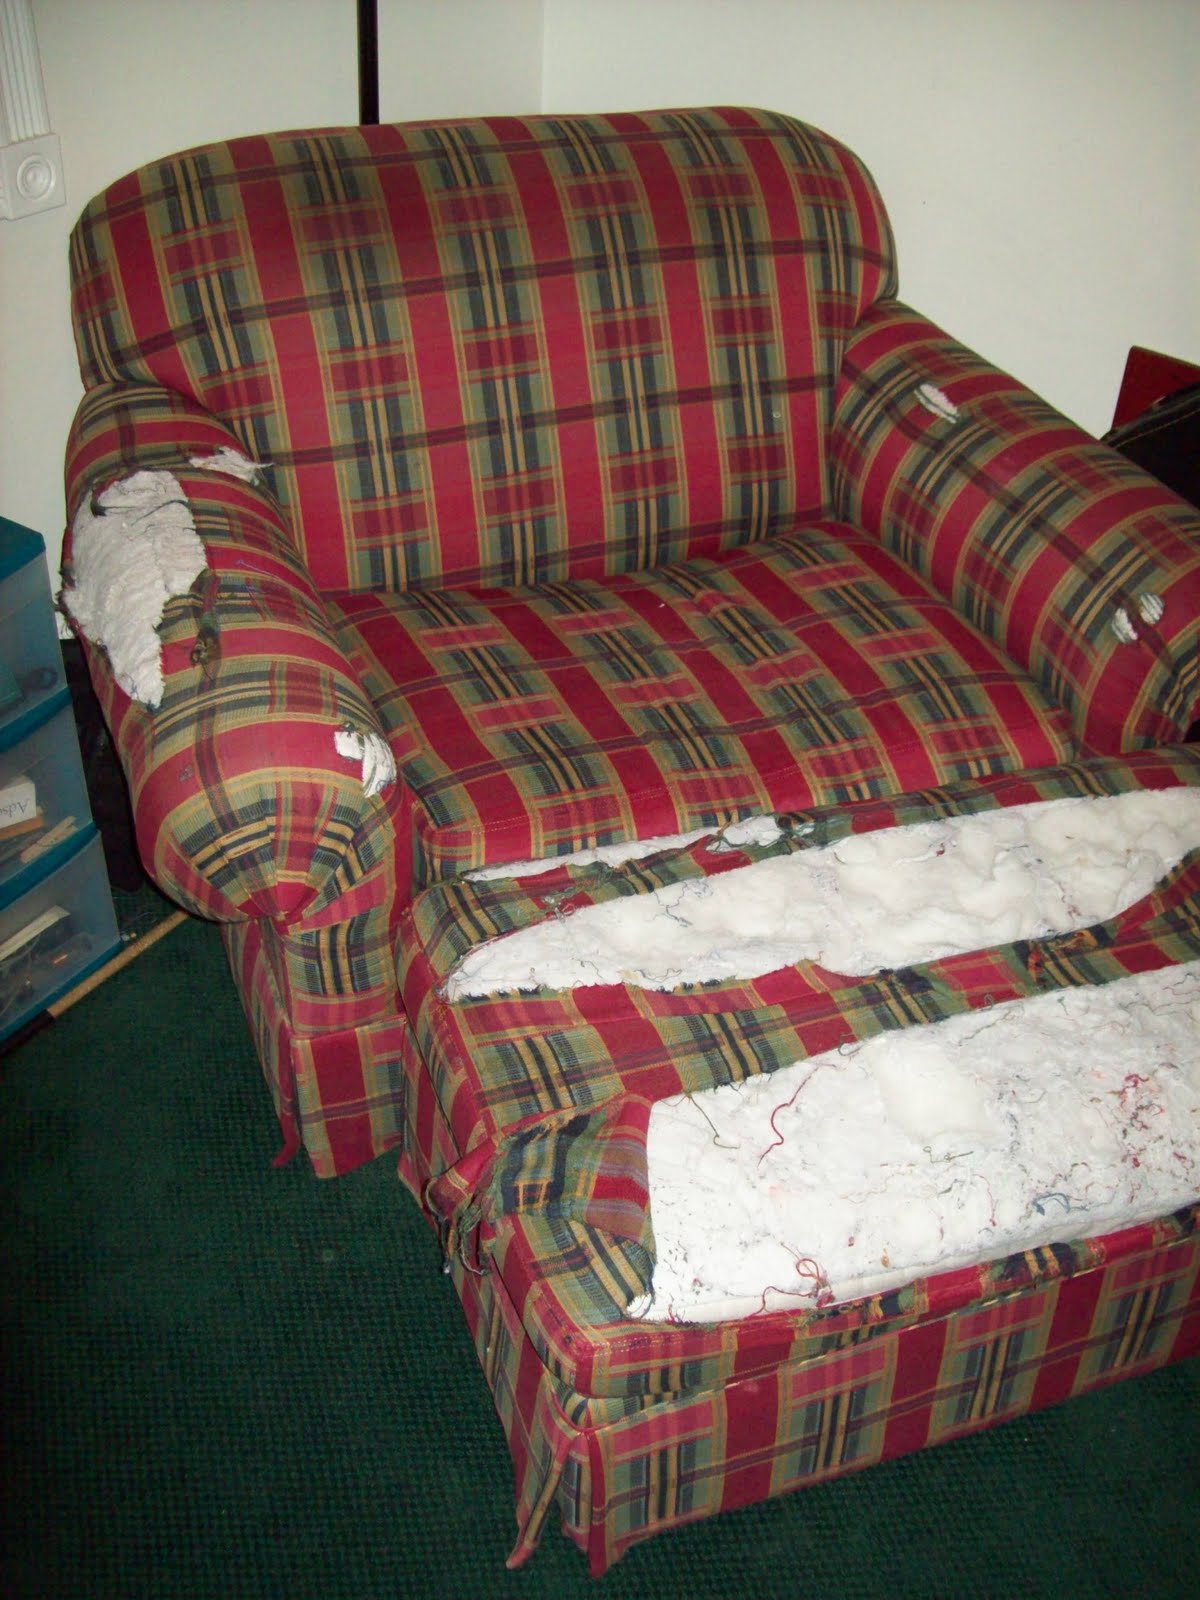 To Re-Upholster or Buy A New Chair?